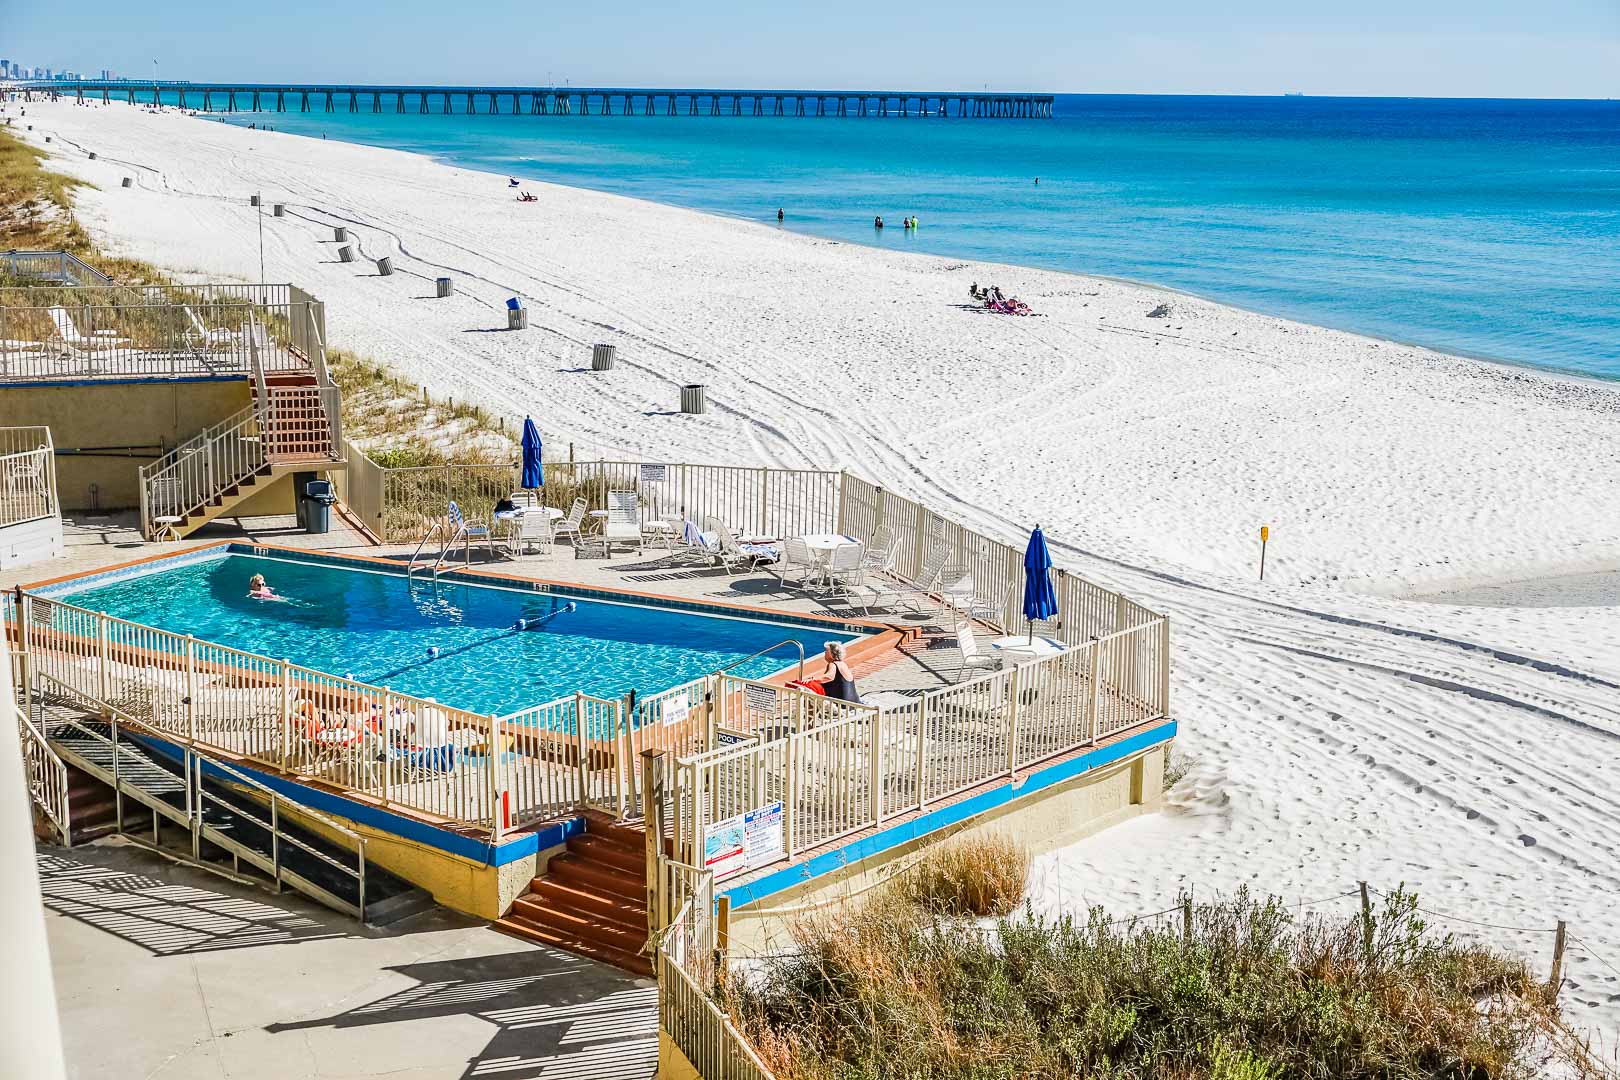 A refreshing pool with beach access at VRI's Panama City Resort & Club in Florida.